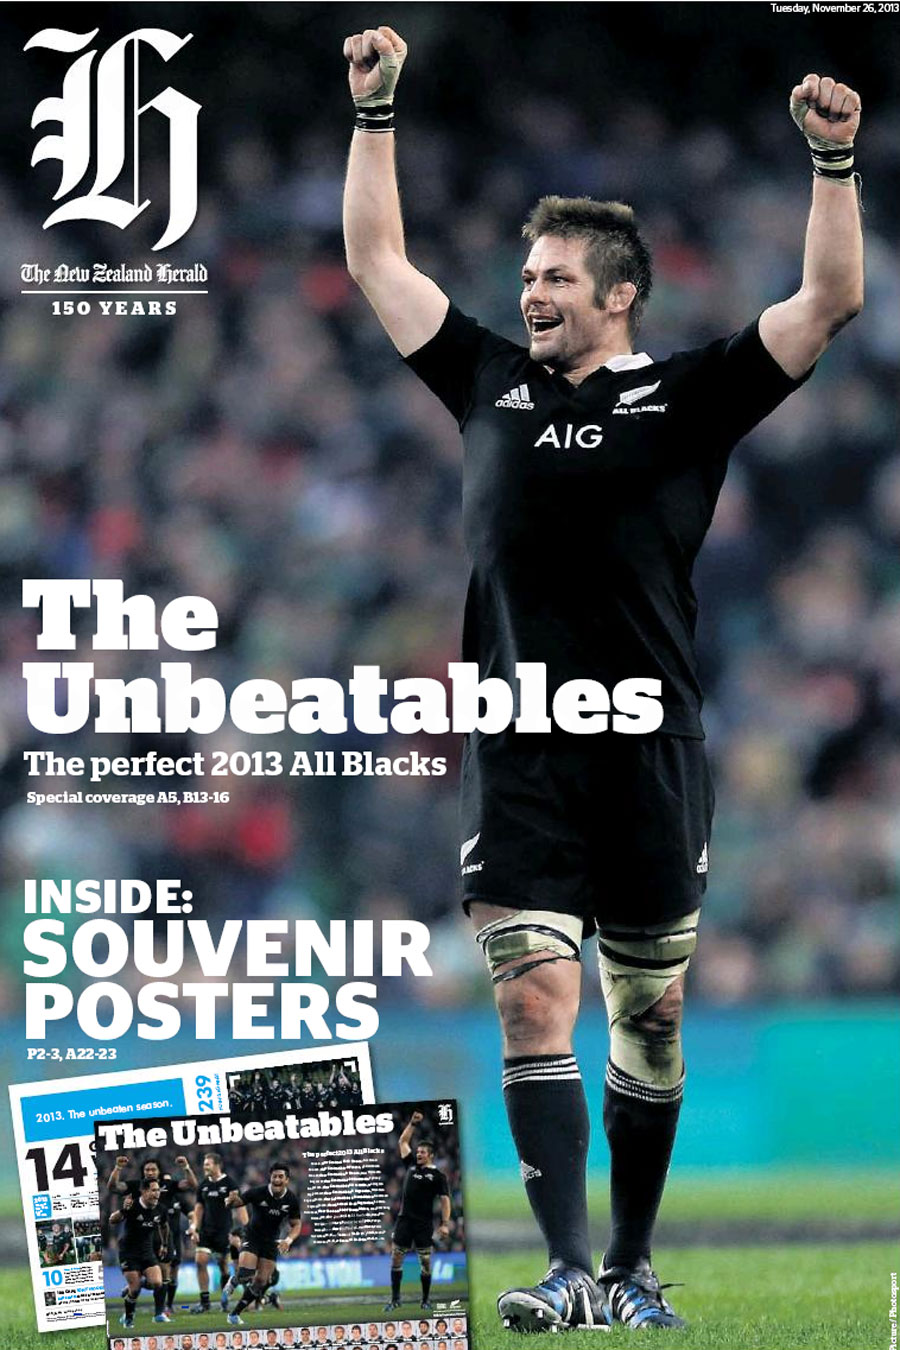 The <I>New Zealand Herald</I> celebrates a remarkable year for the All Blacks